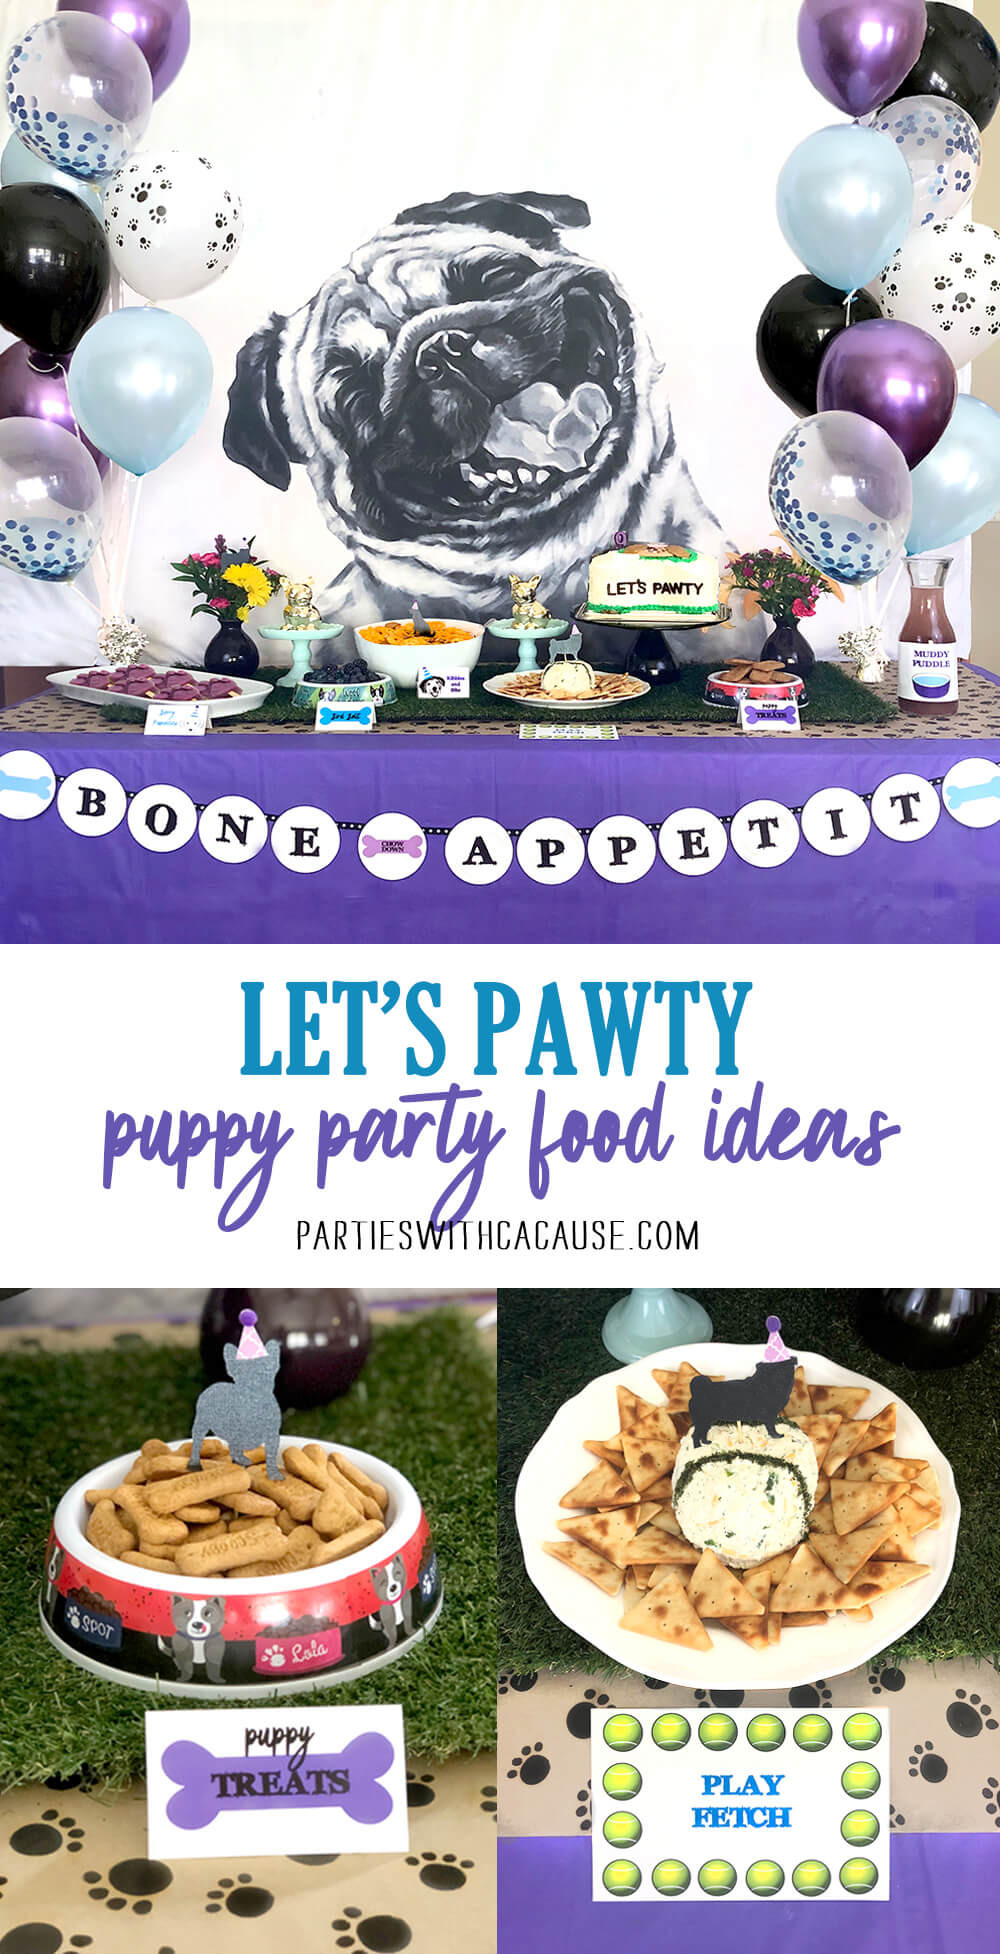 Birthday Party Menu Ideas
 21 Puppy Themed Birthday Party Food Ideas Parties With